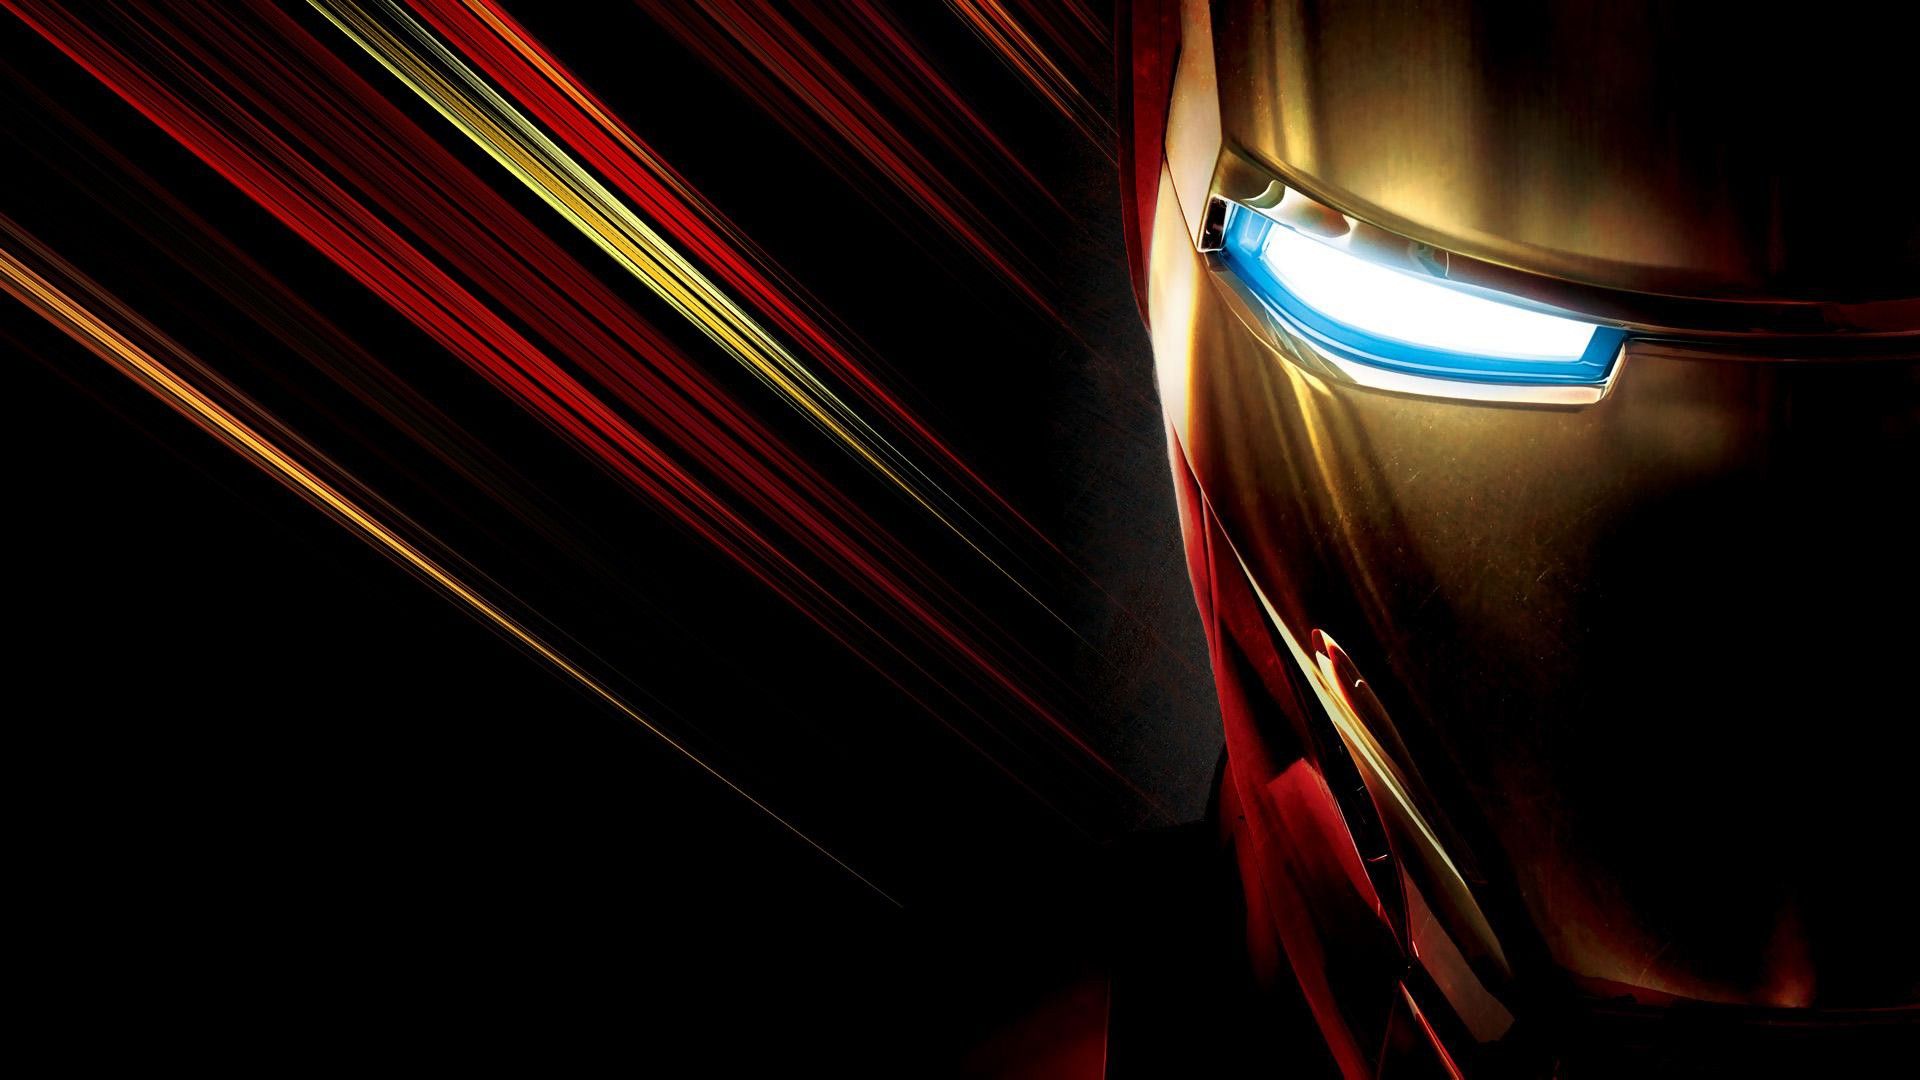 Iron Man Picture Wallpapers 7824 - HD Wallpaper Site